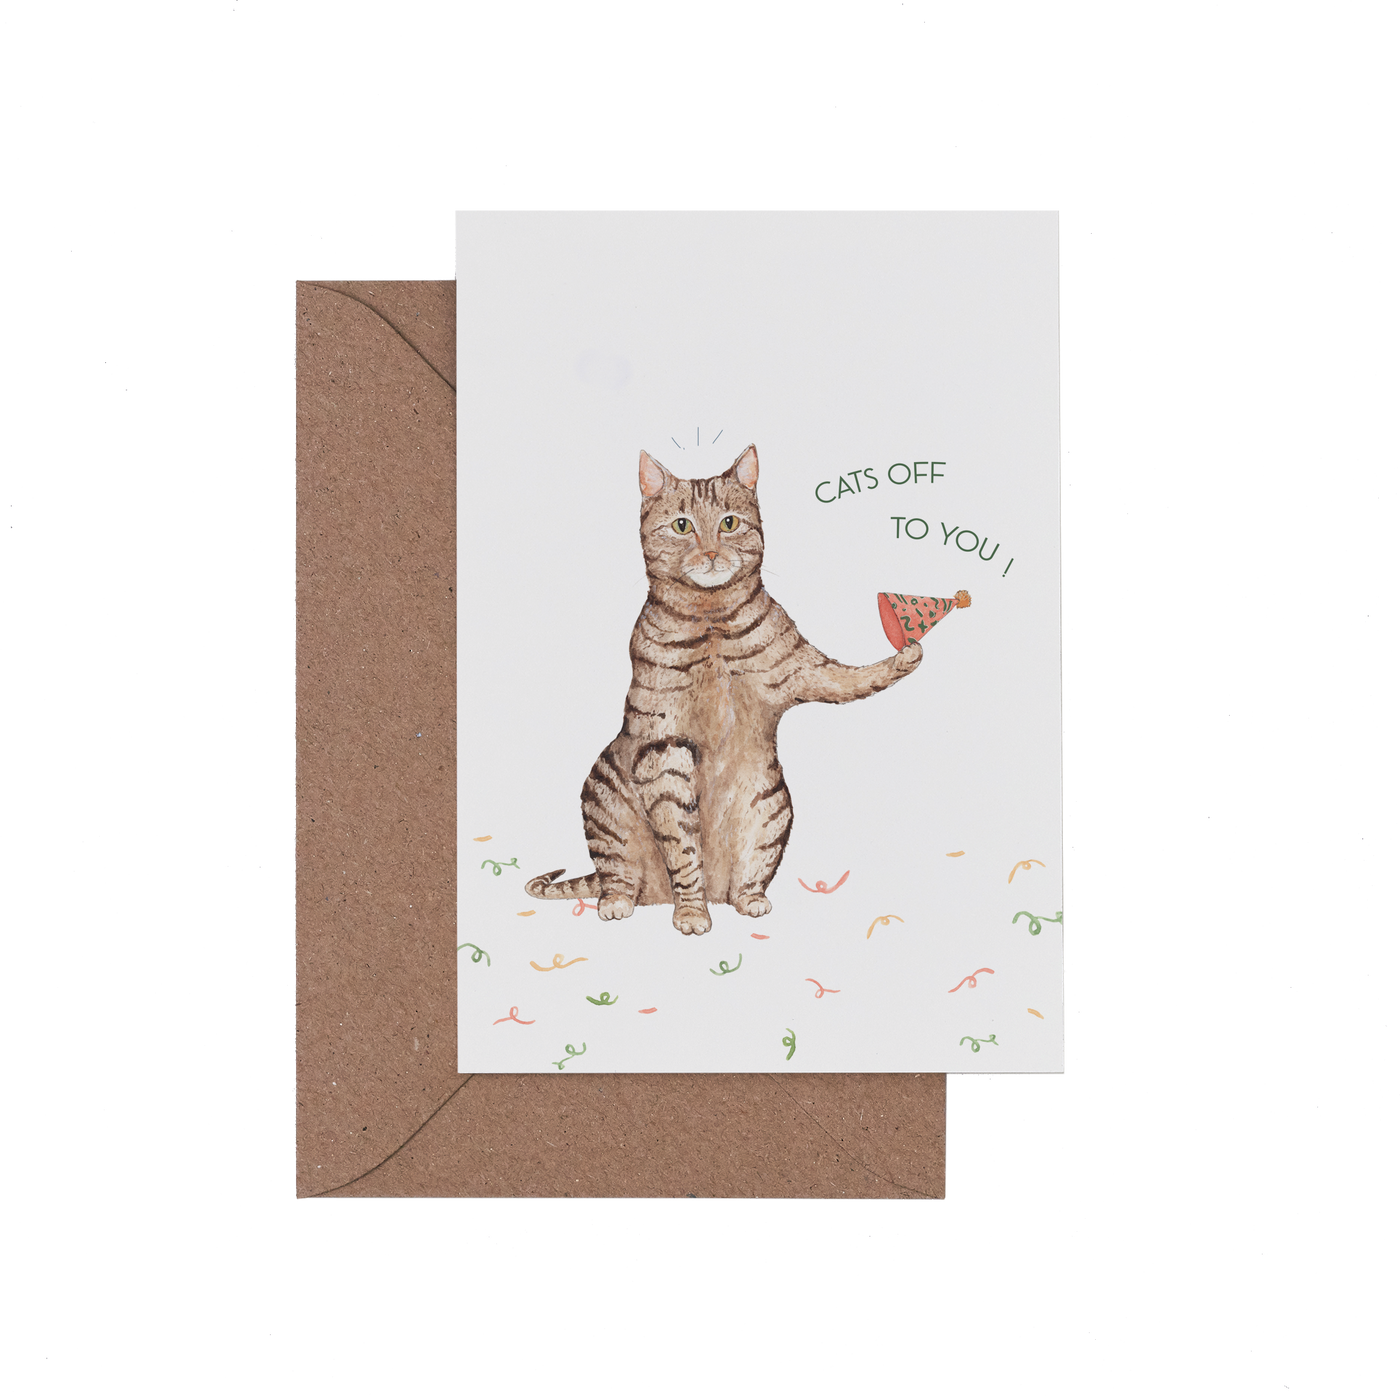 Cats Off Card